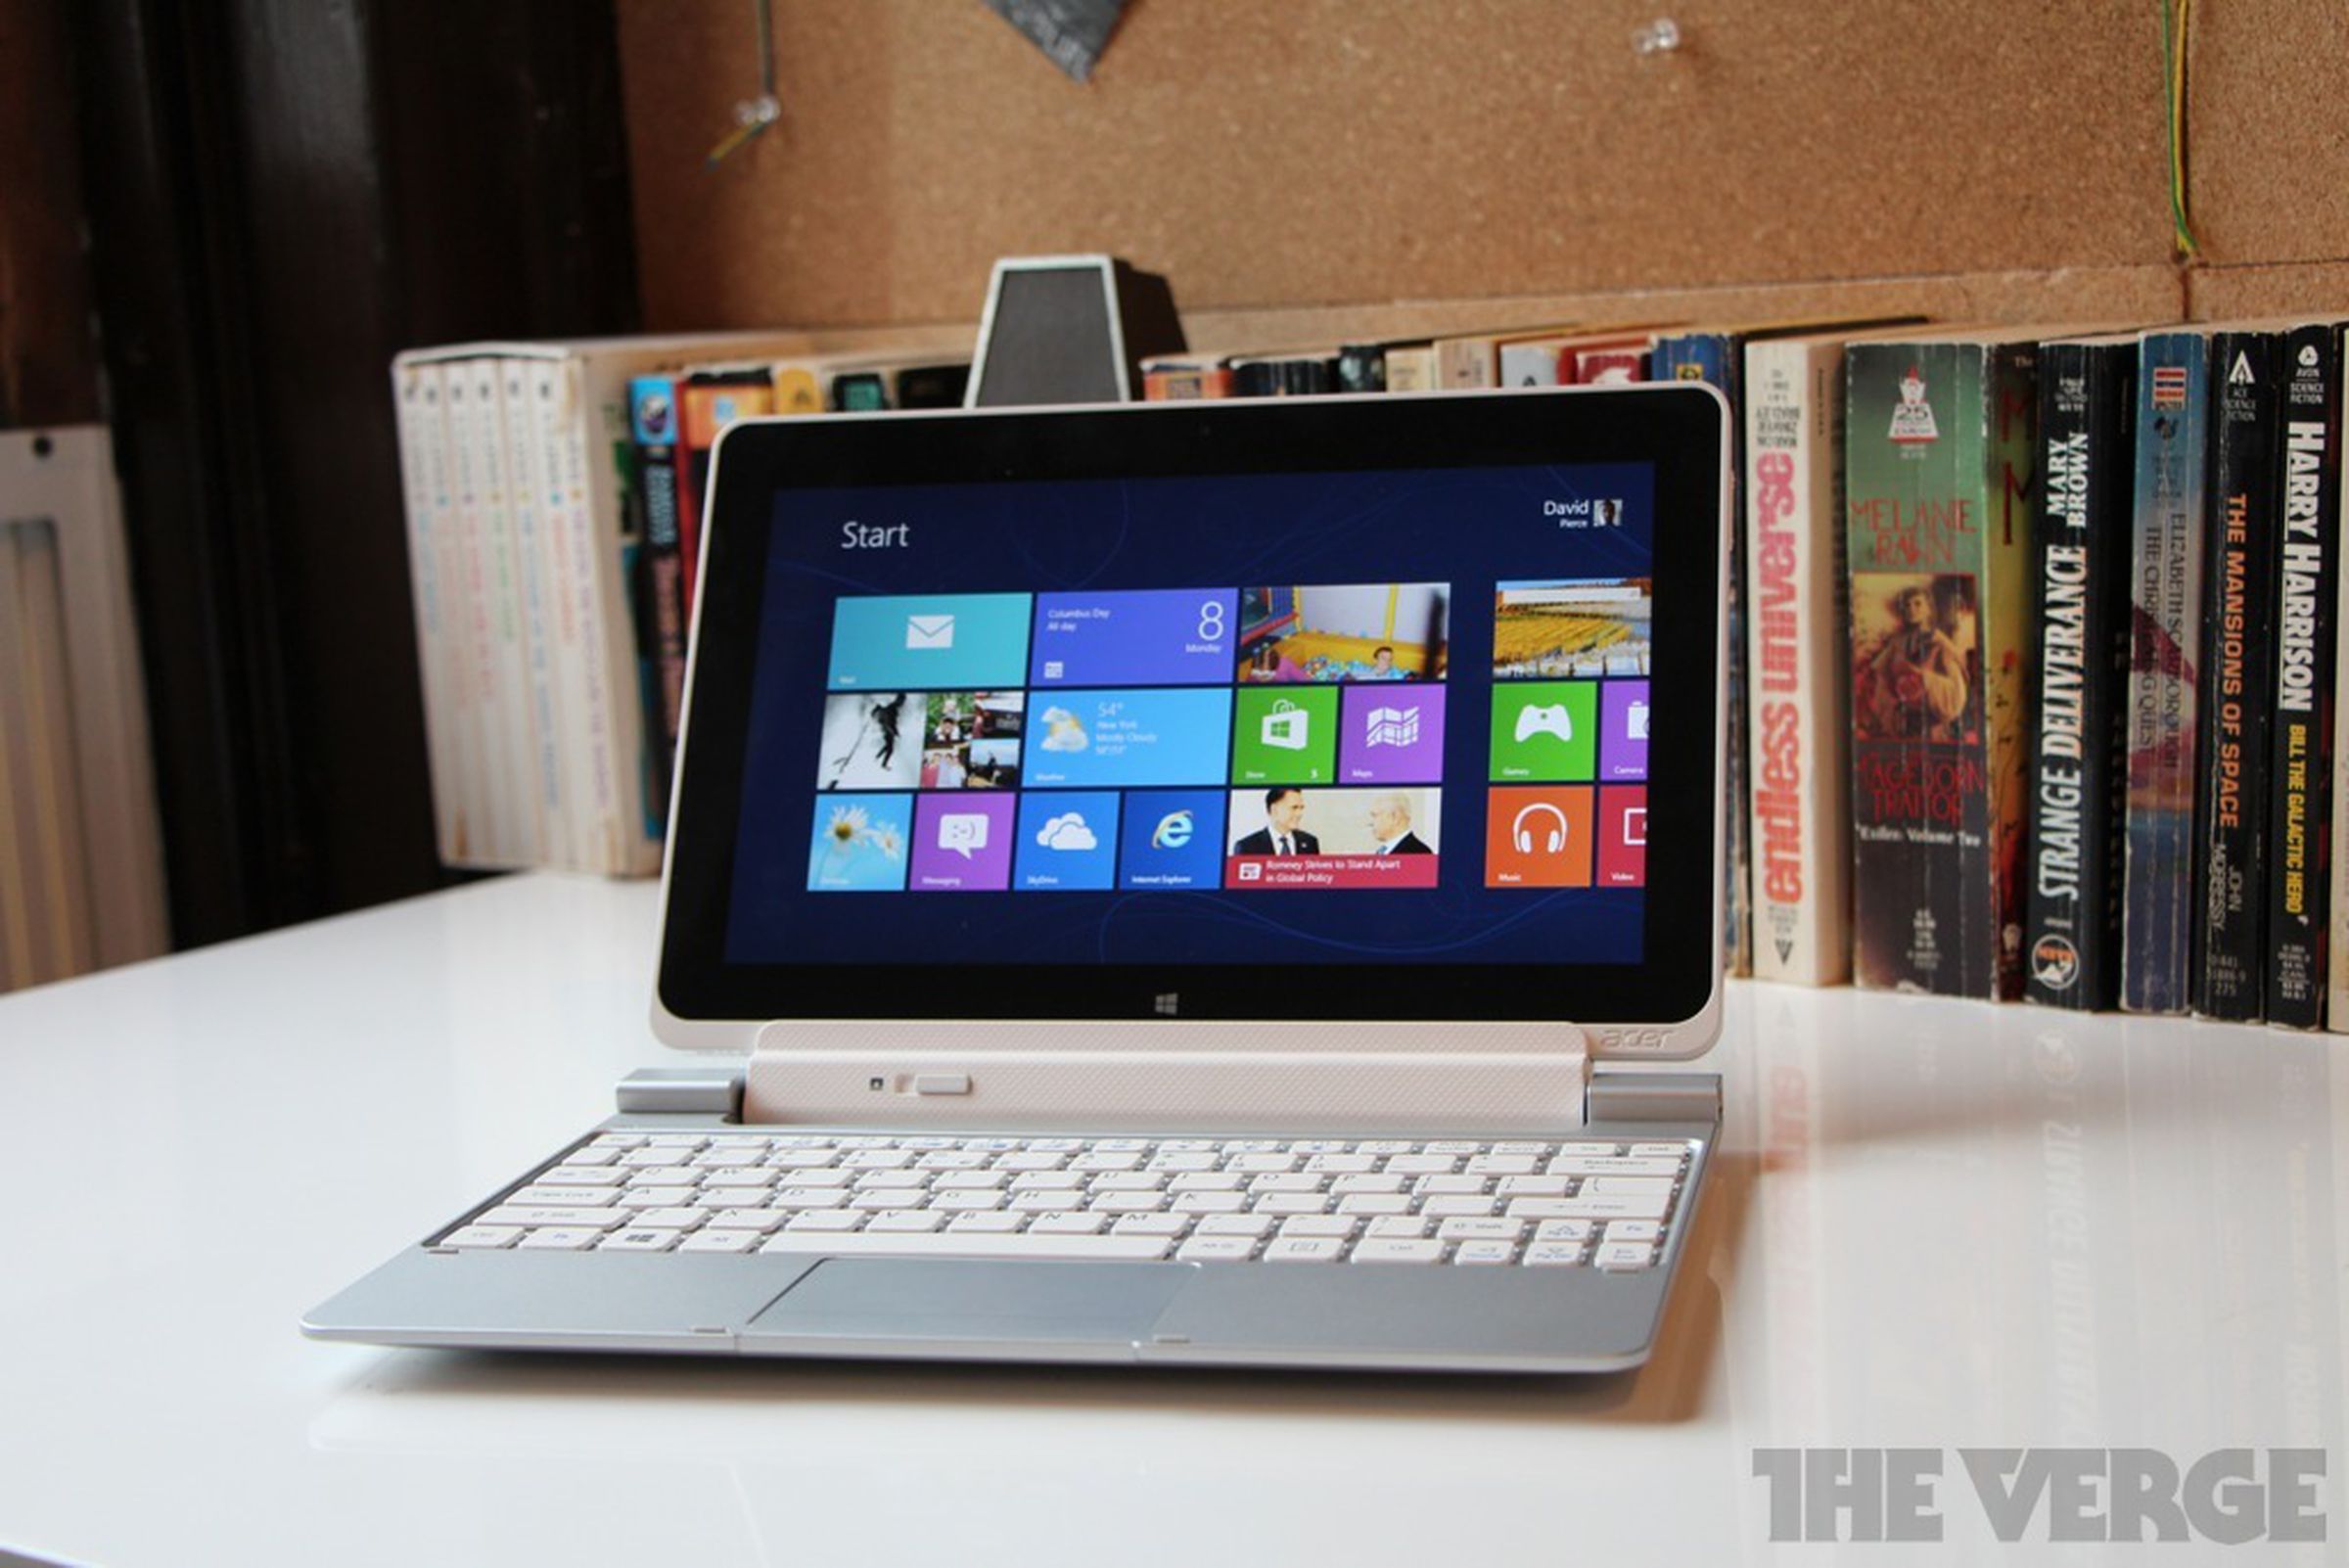 Acer Iconia W510 pictures